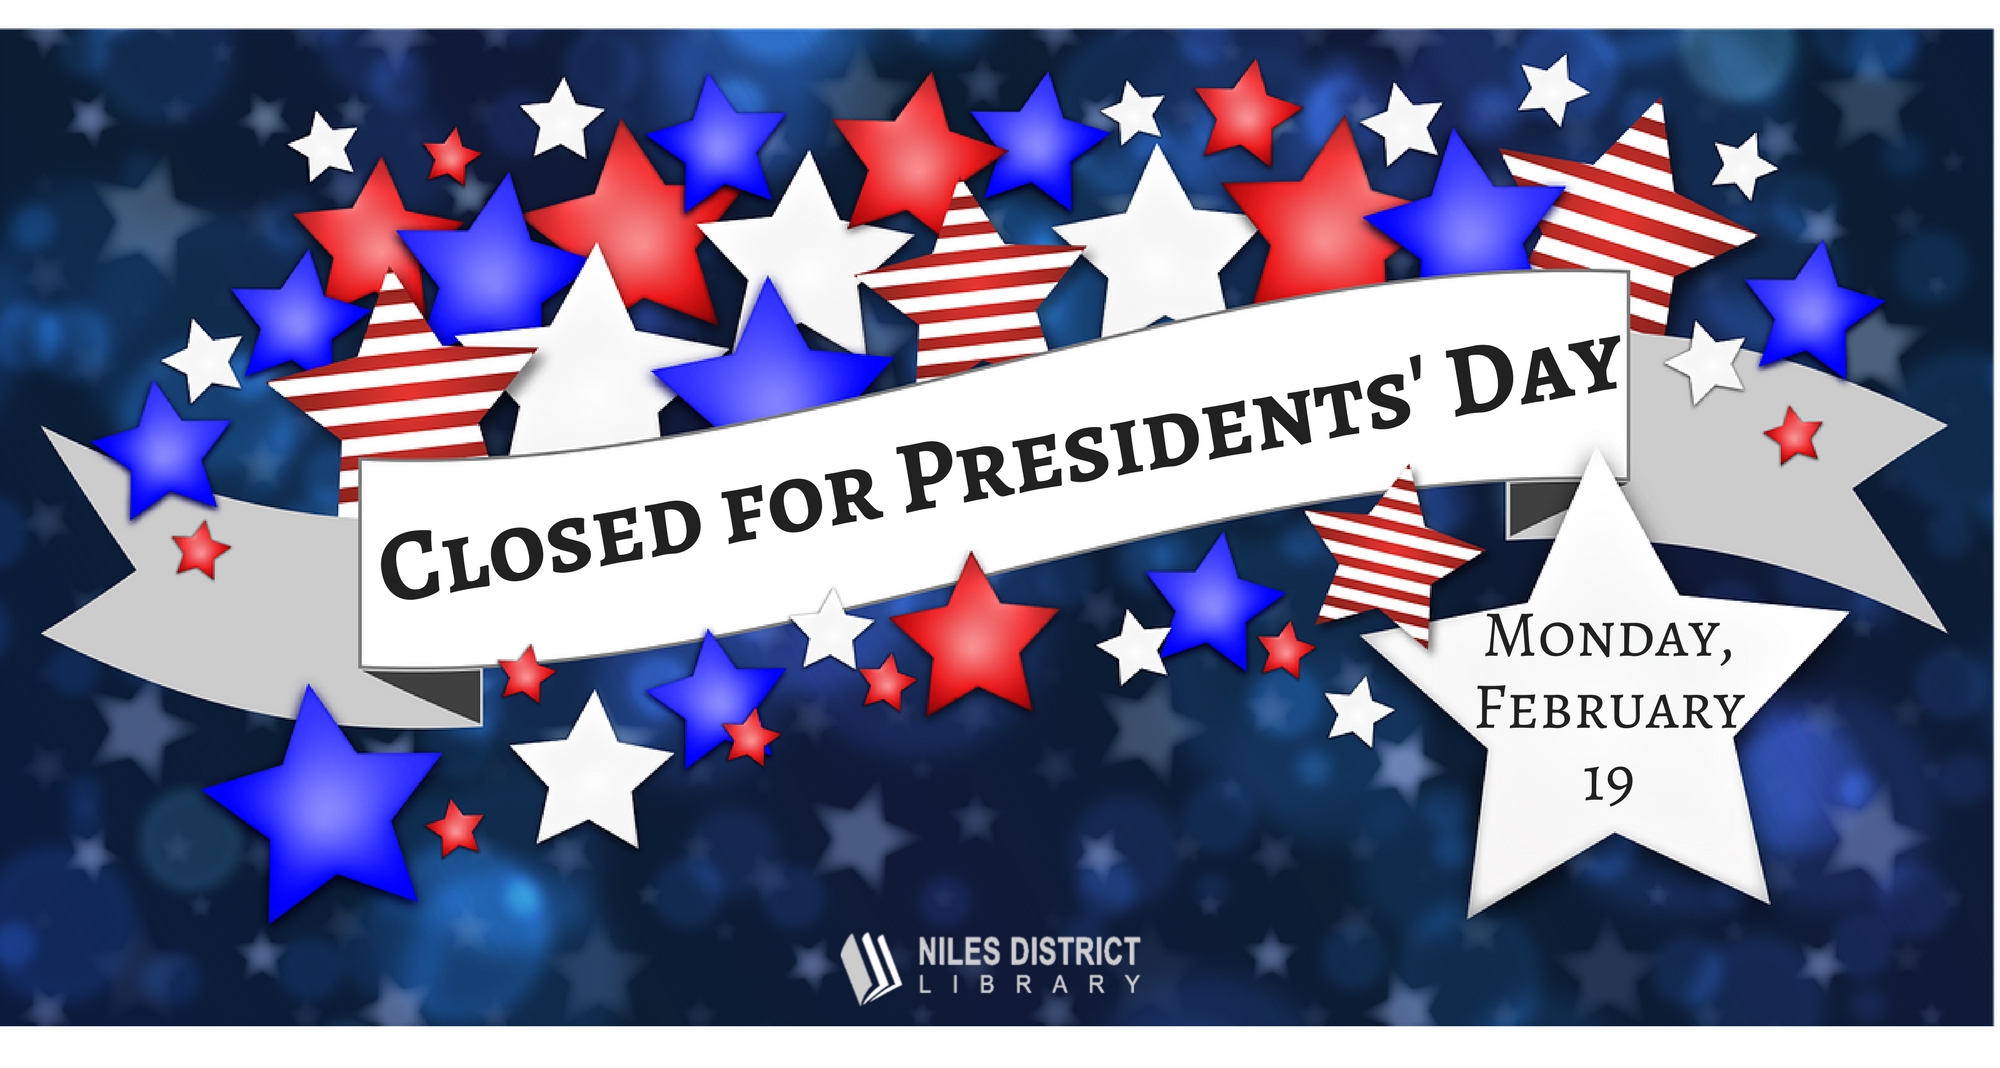 Closed for Presidents’ Day